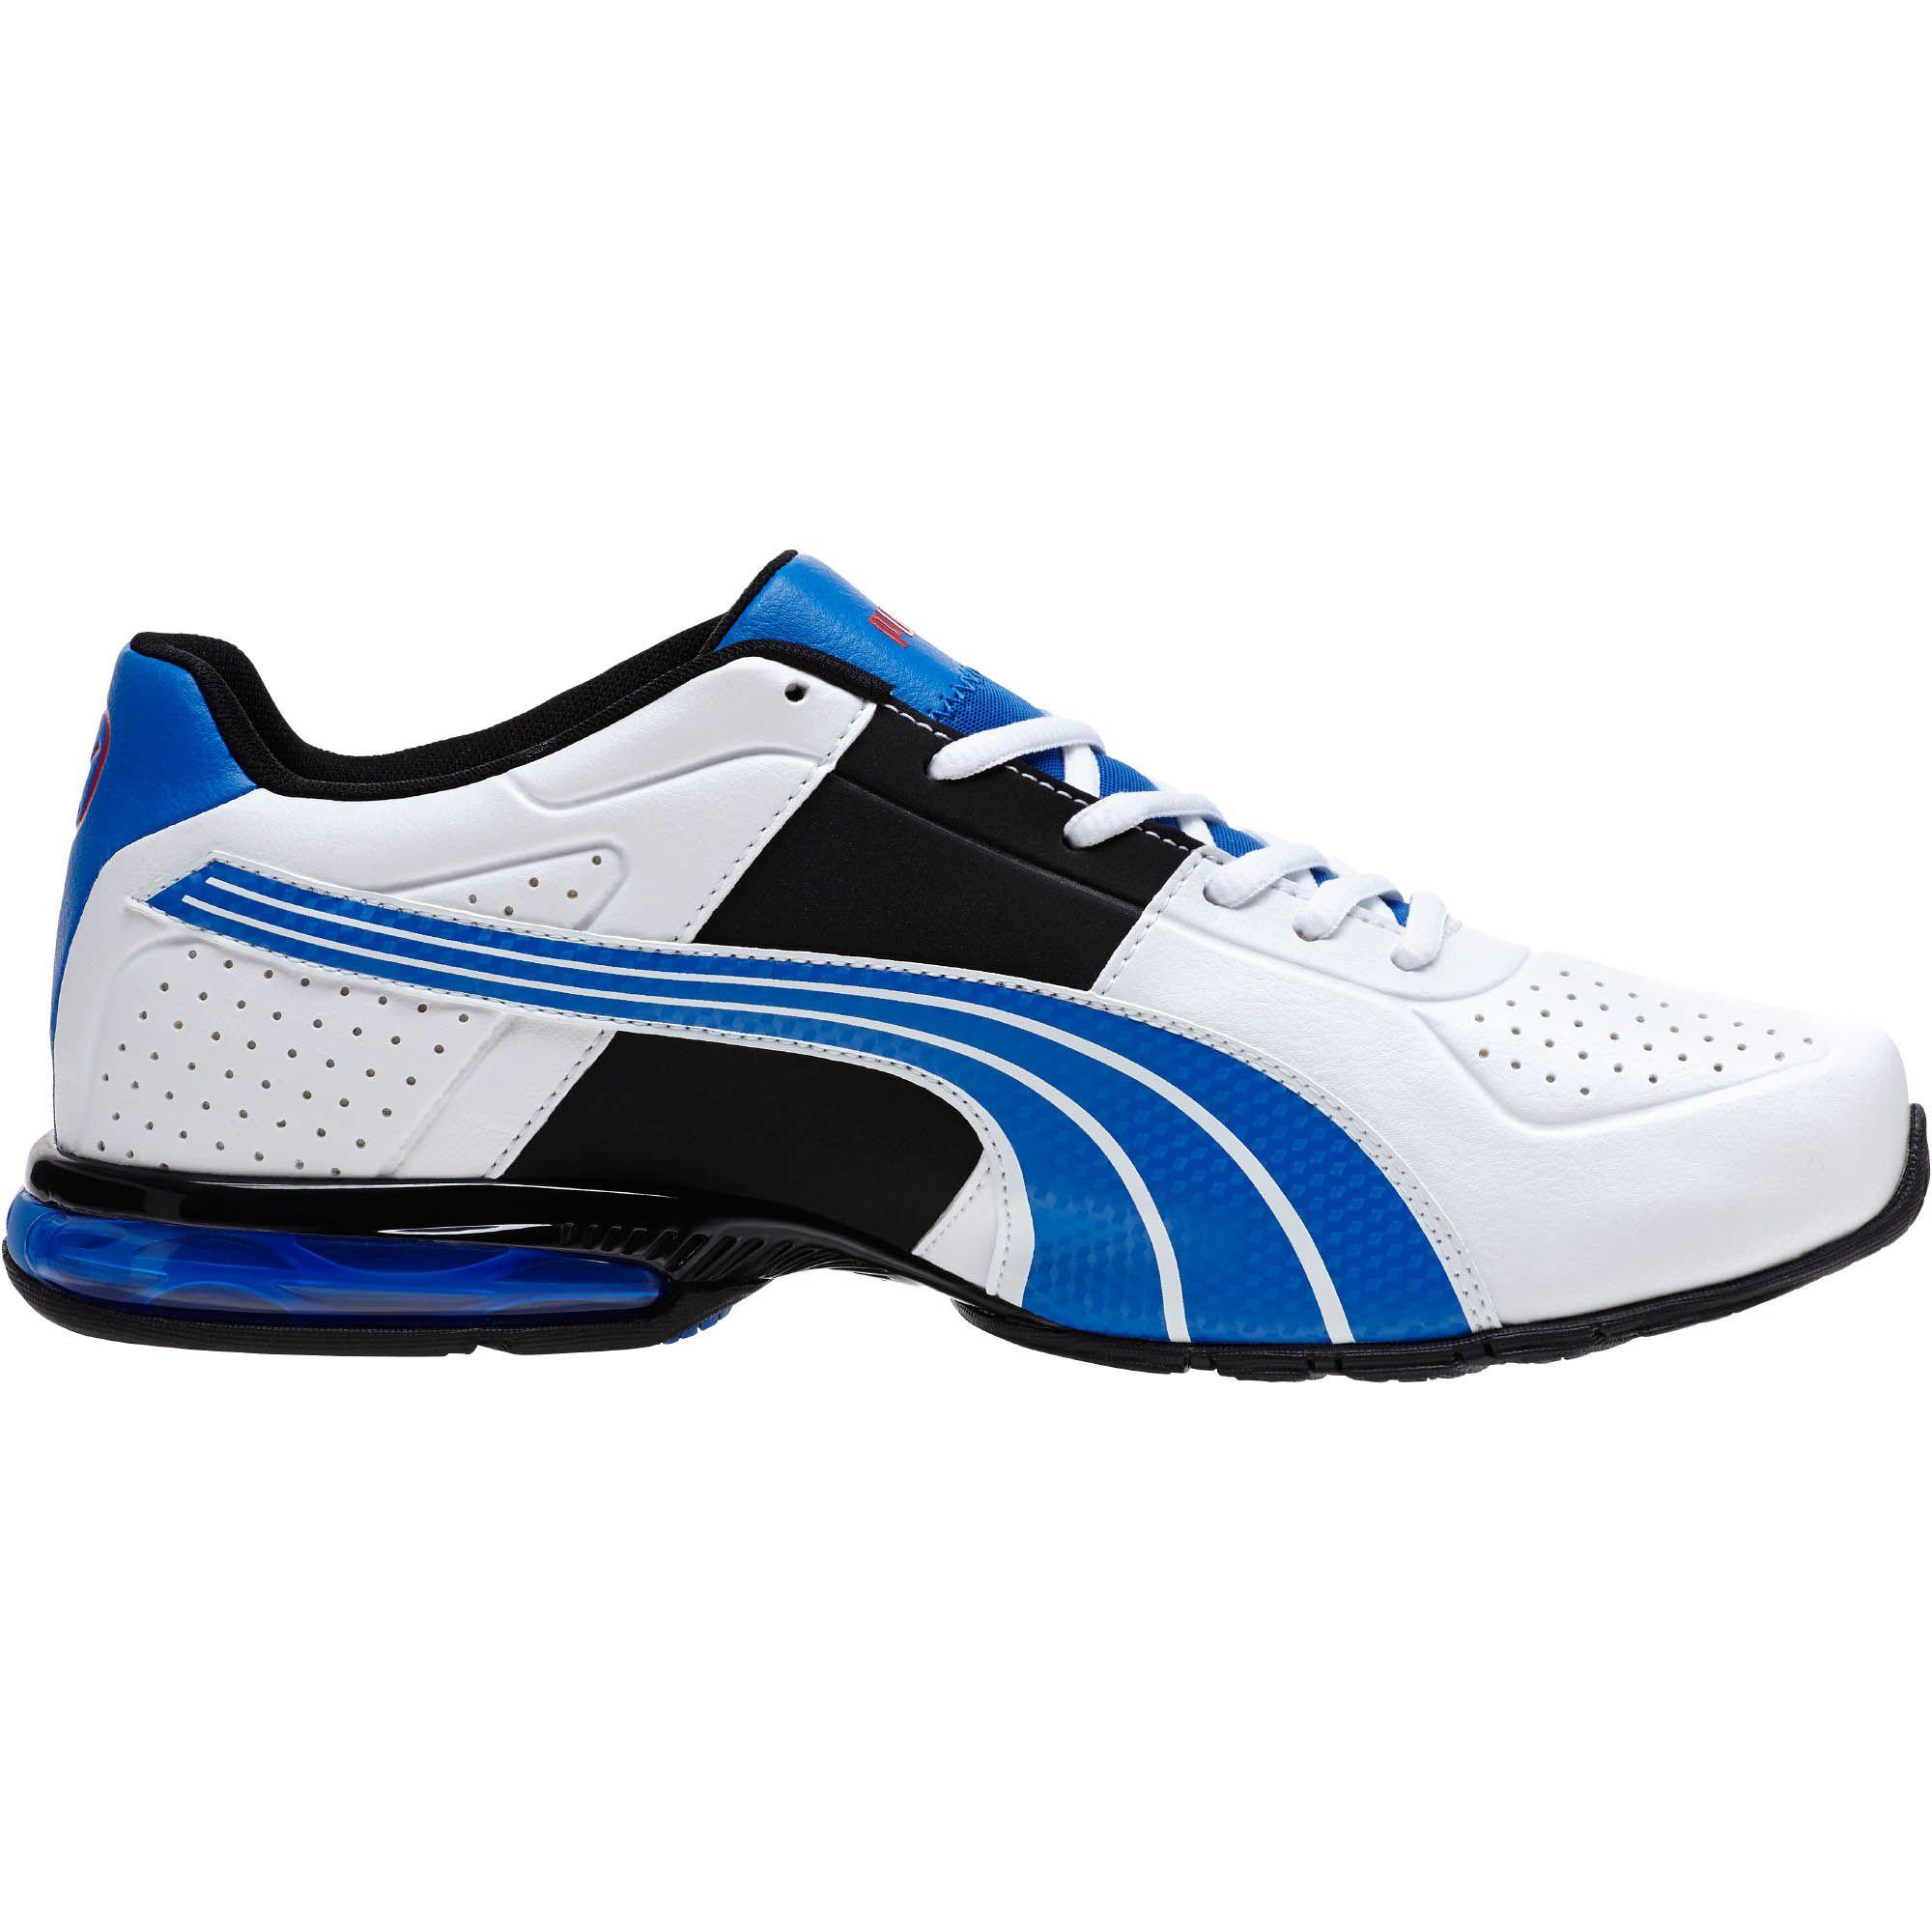 Lyst - Puma Cell Surin Men's Running Shoes in Blue for Men